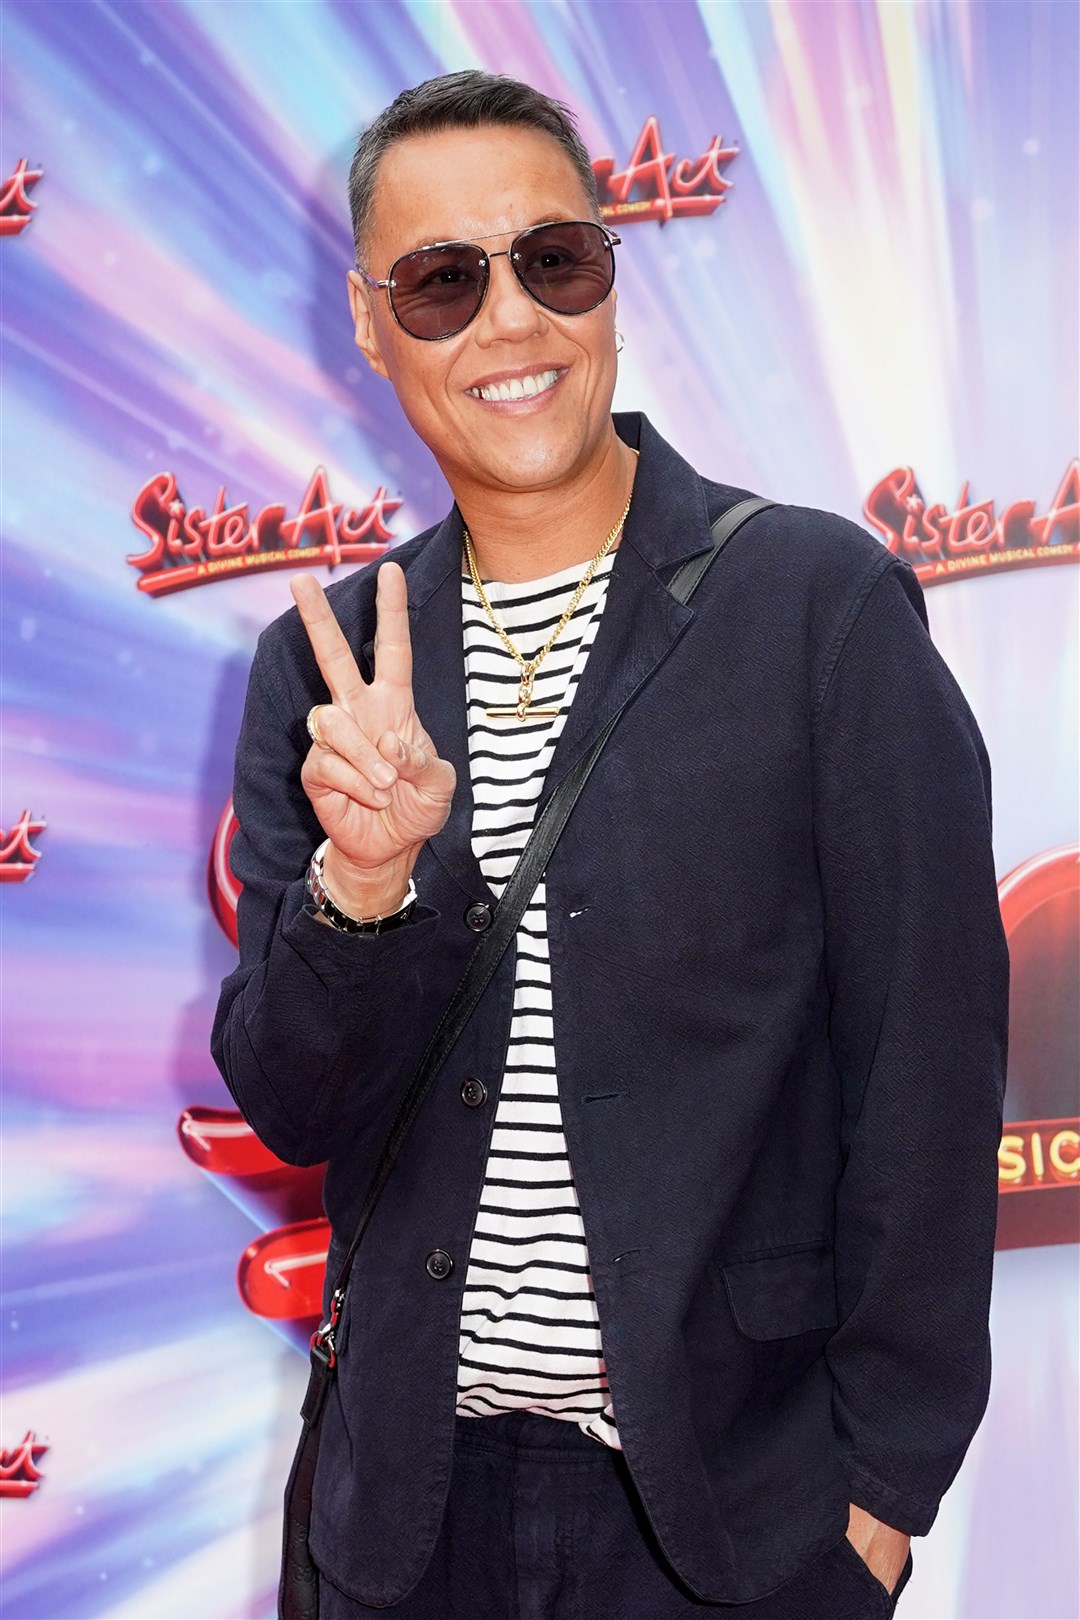 Gok Wan DJed at Glastonbury, adding that the musical festival was ‘epic’ (Yui Mok/PA)